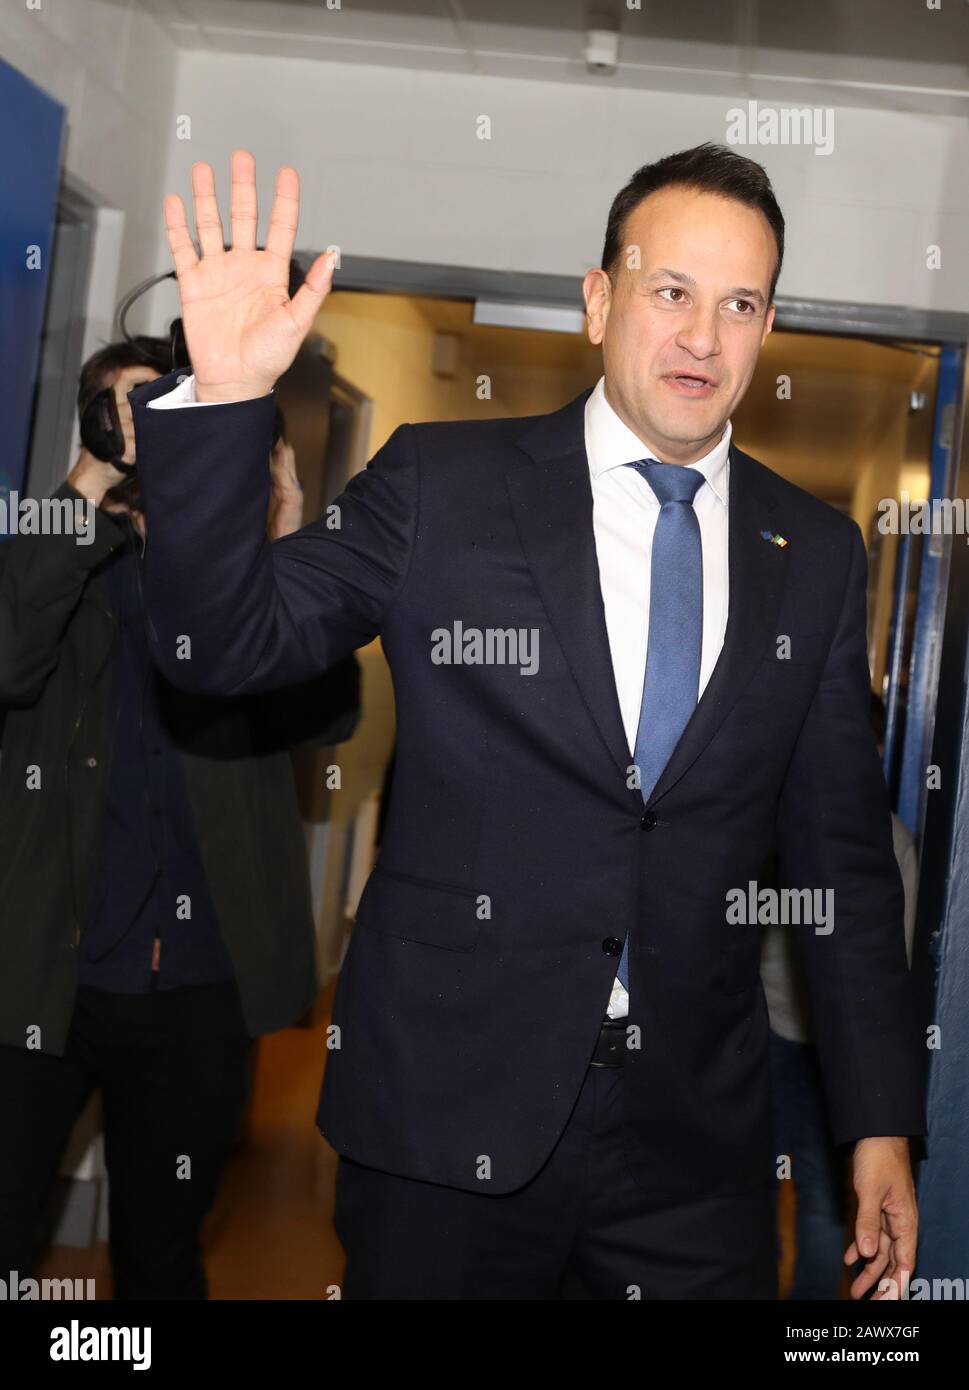 Dublin, Ireland. 9th Feb 2020. General Election Results. Counting of Ballots. Ballot papers in the Phibblestown Community Centre in Dublin West. Taoiseach and Fine Gael leader Leo Varadkar arriving at the Count Centre. Photo: Eamonn Farrell/RollingNews.ie Credit: RollingNews.ie/Alamy Live News Stock Photo